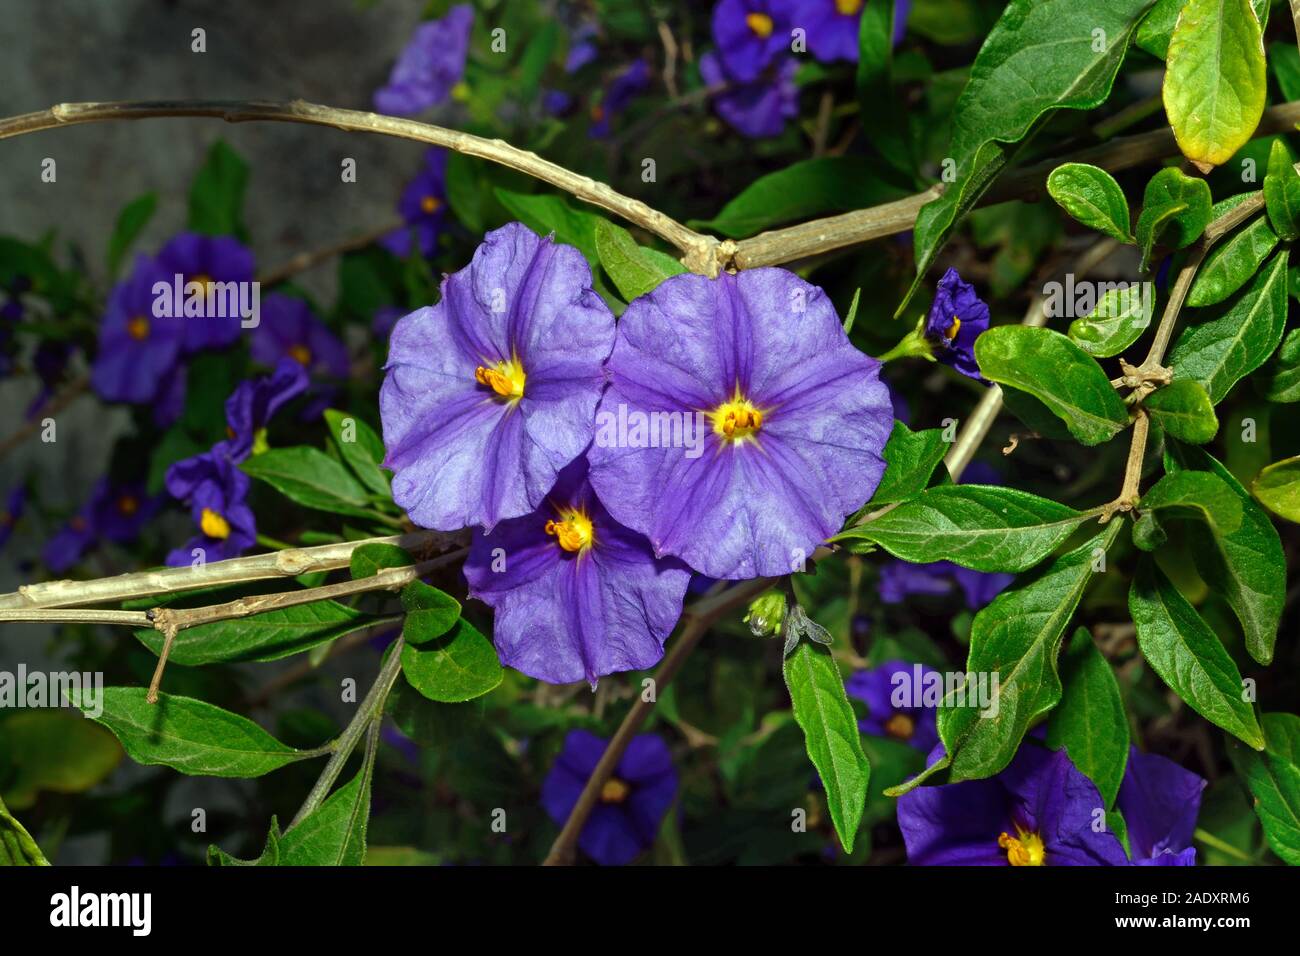 Convolvulus sabatius (ground blue-convolvulus) is native to Italy and North Africa but often seen in cultivation. Stock Photo